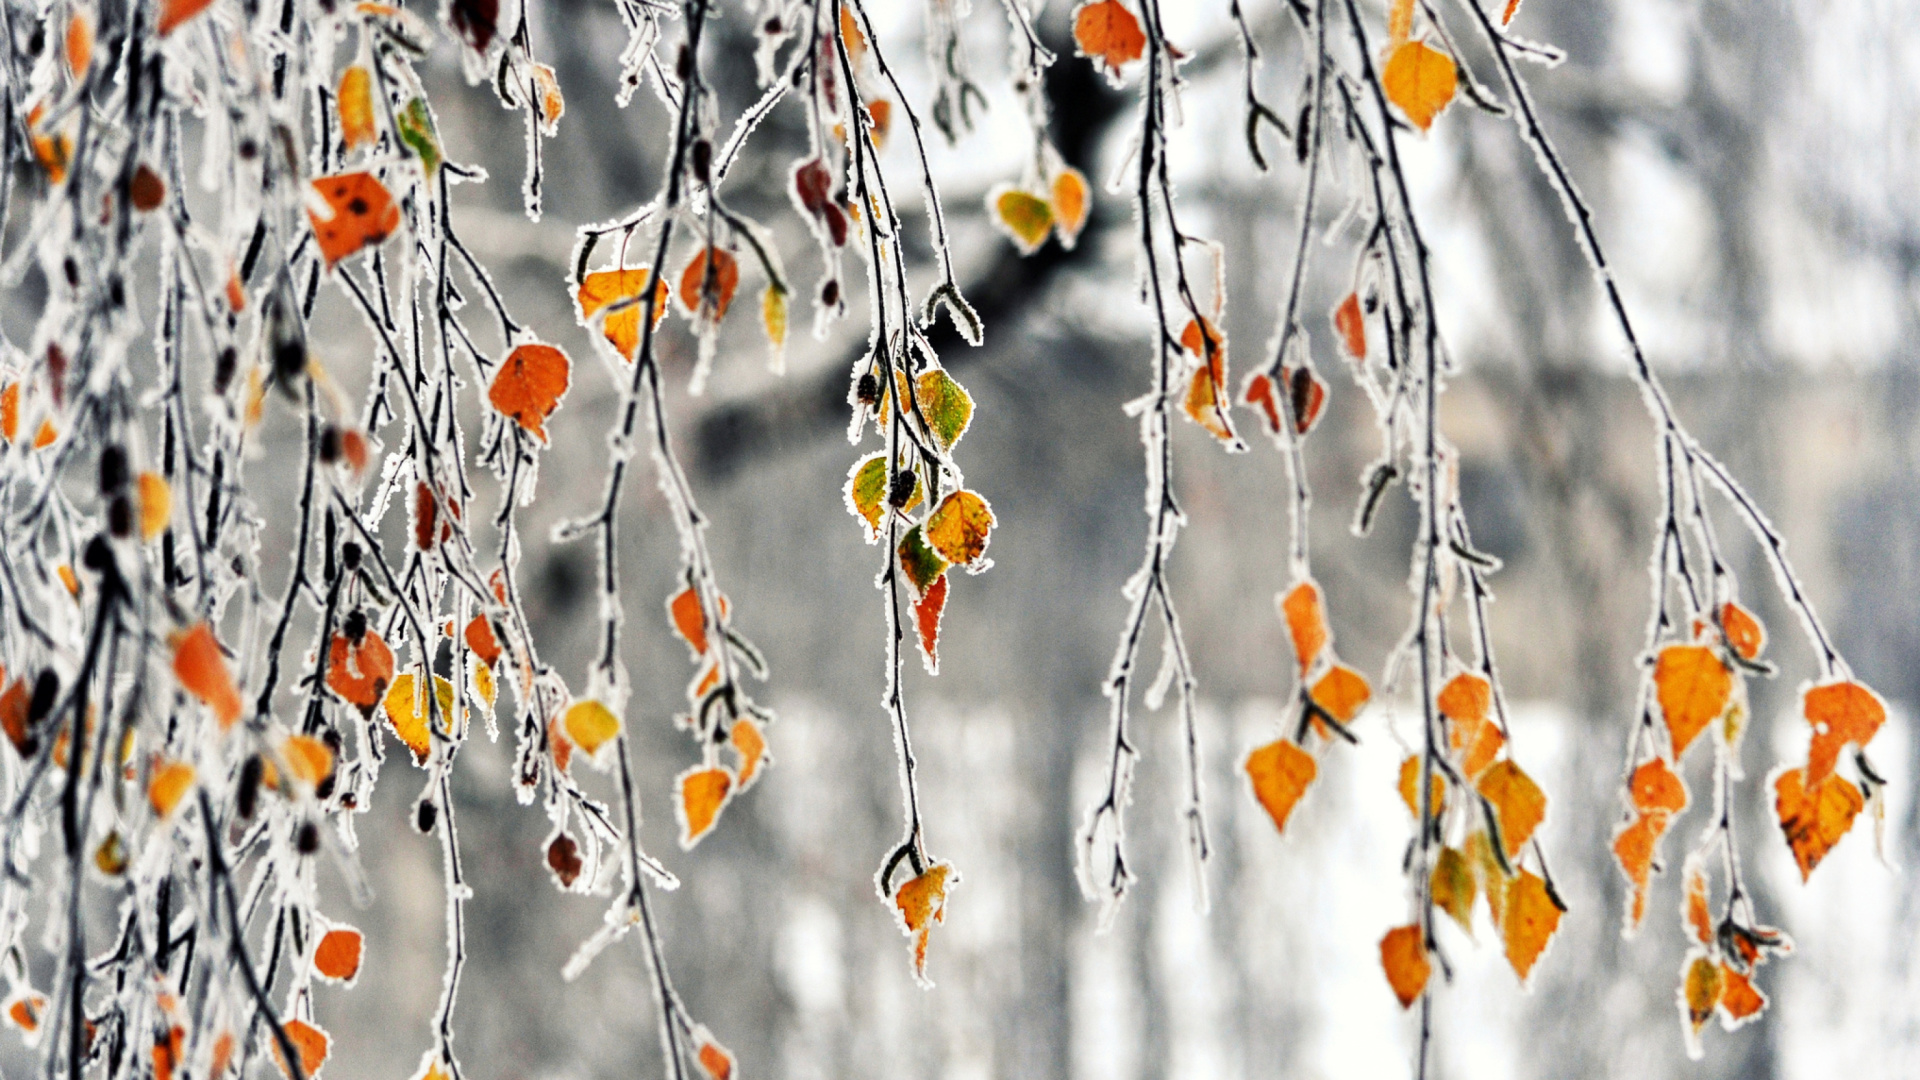 Autumn leaves in frost wallpaper 1920x1080